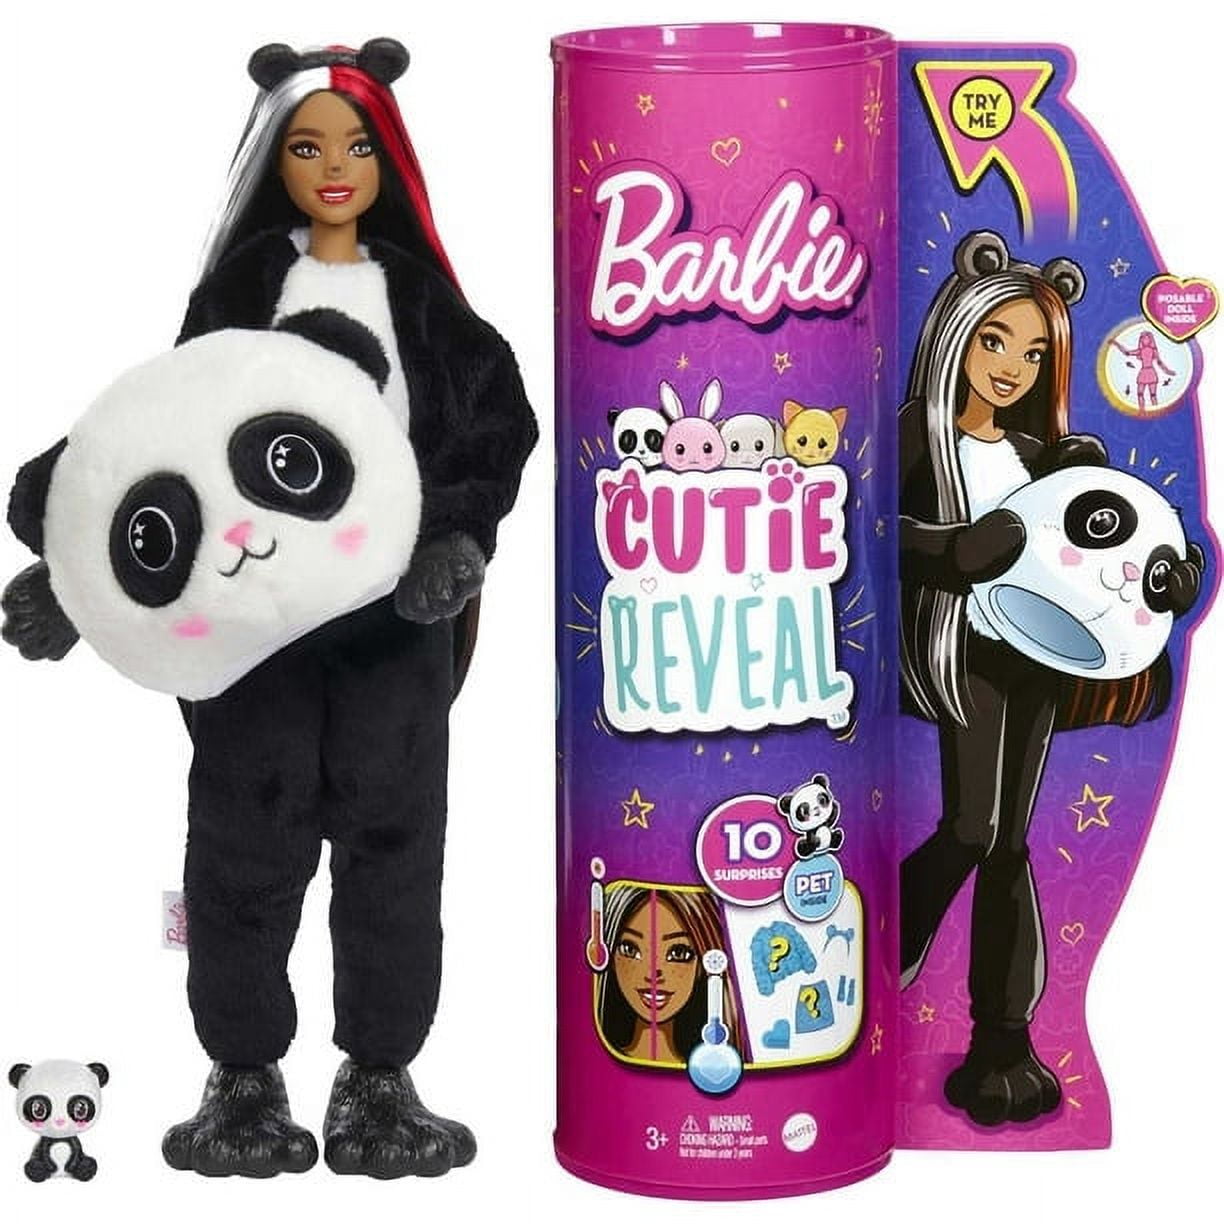  Barbie Doll, Cutie Reveal Kitty Plush Costume Doll with 10  Surprises, Mini Pet, Color Change and Accessories : Everything Else